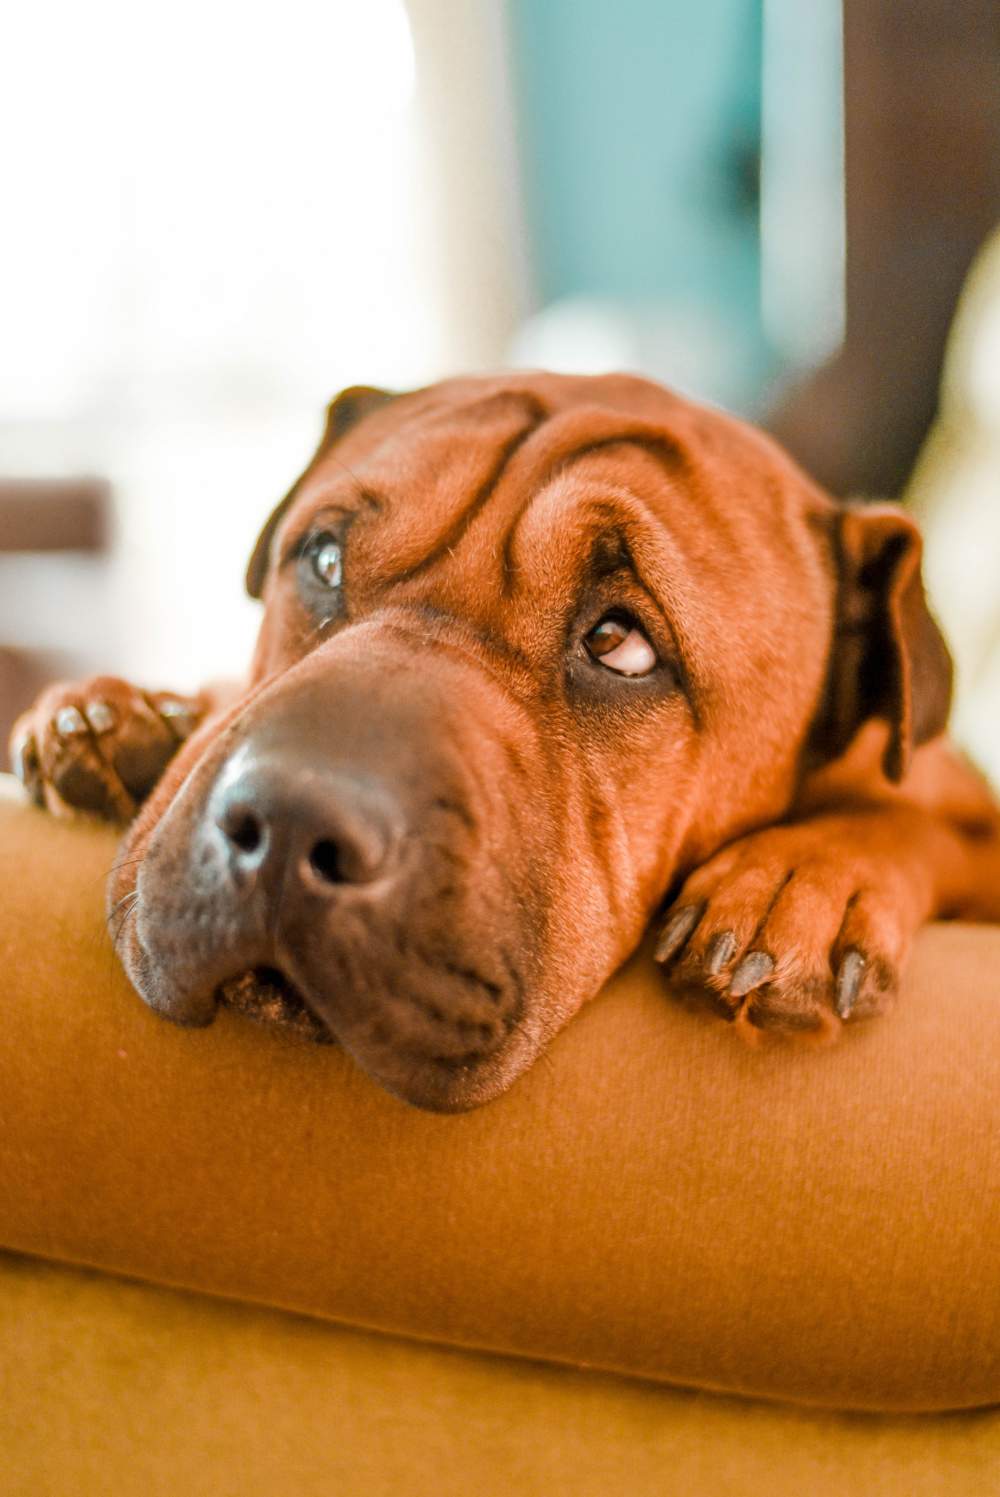 Does Carpet Cleaning Kill Fleas?